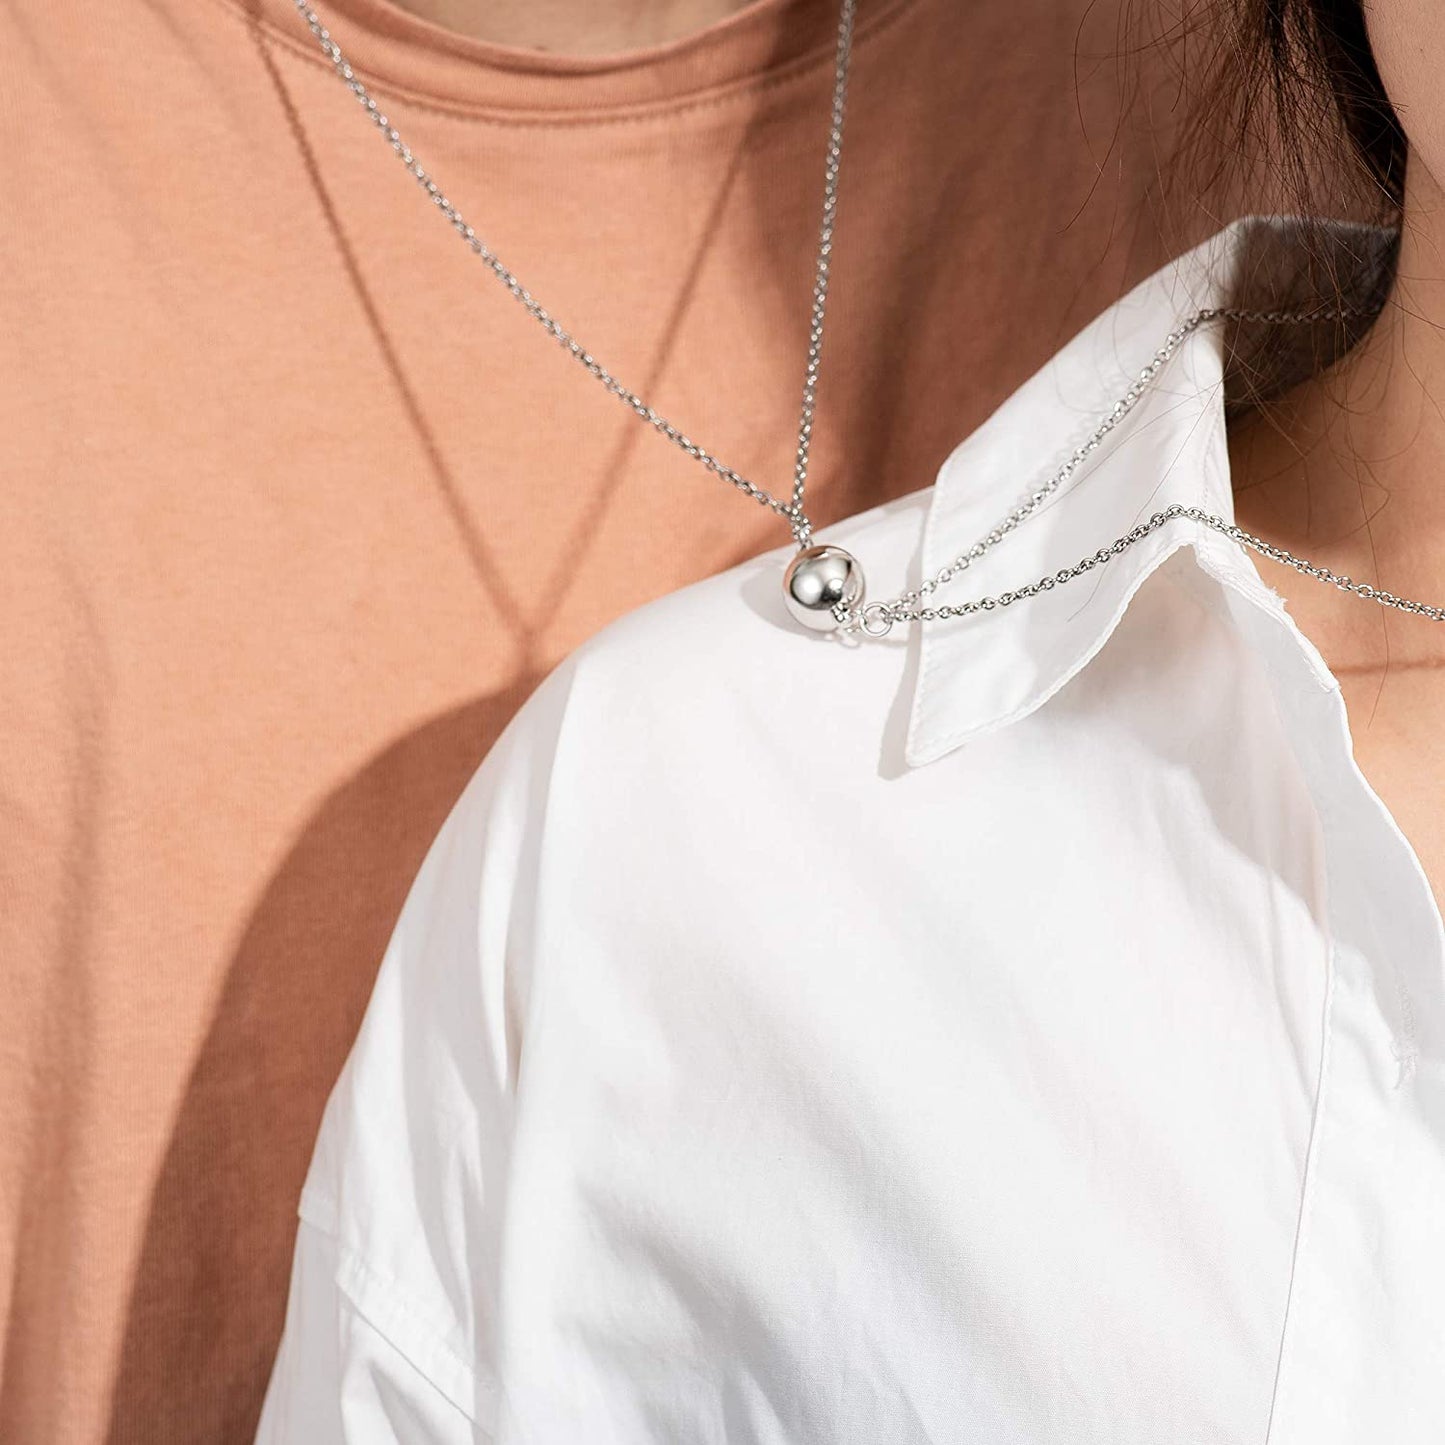 Magnetic Love Necklaces for Couples & BFFs